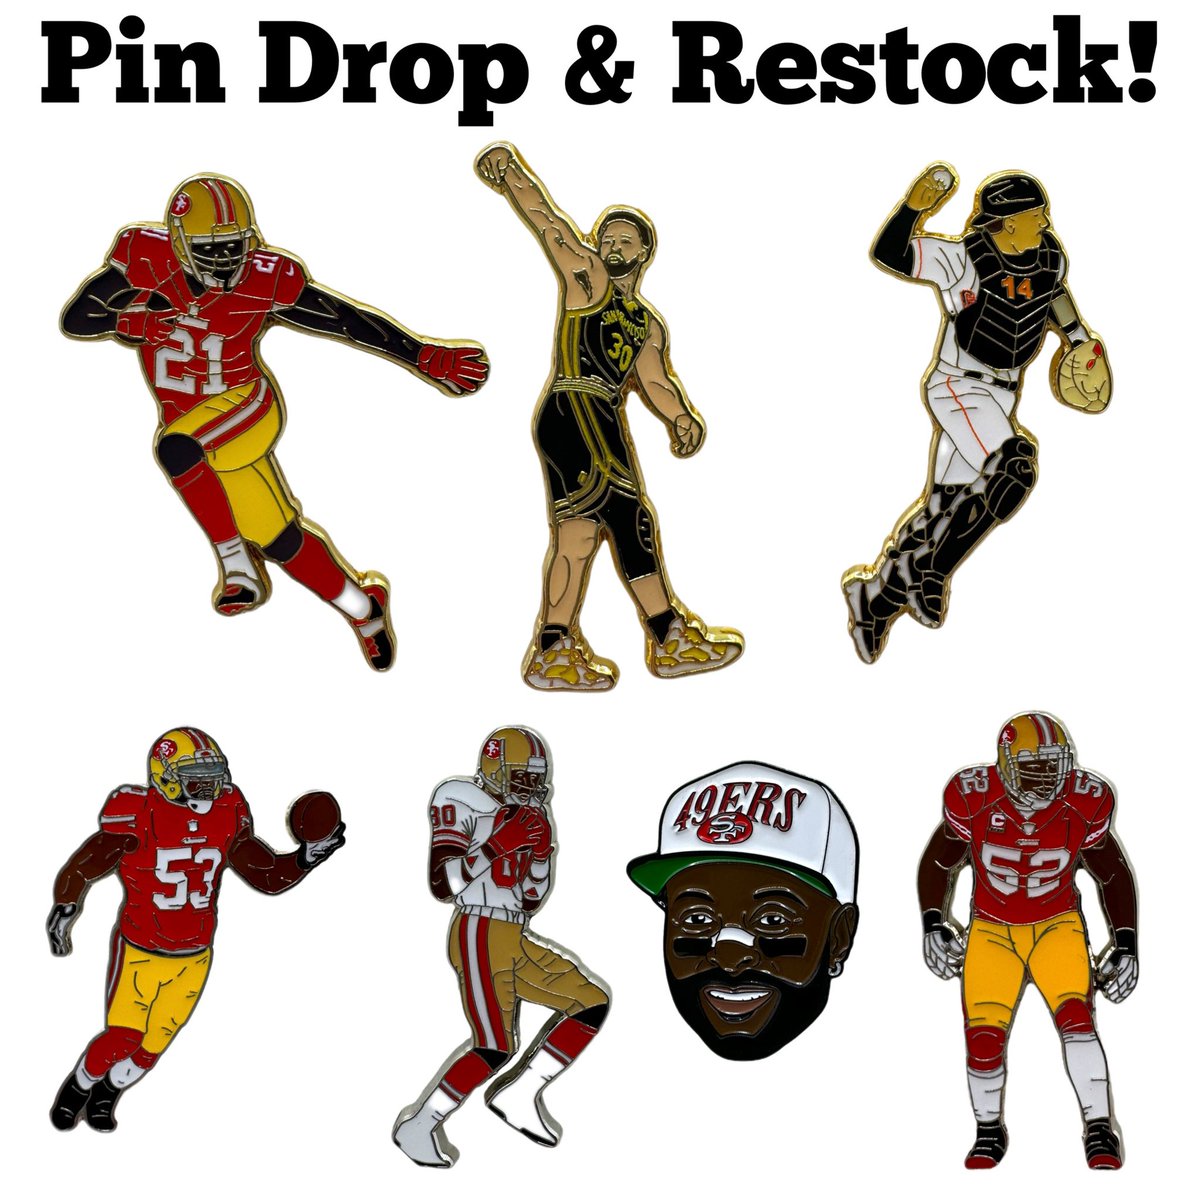 Now Available!

starkxpress.com

#49ers #49erspins #SF49ers #NinerEmpire #NinerFaithful #Niners #ninergang #stephcurry #curry #sf #SanFrancisco #pincollector #warriors #gsw #gswarriors #dubnation #dubs #sfgiants #sfgiantsfan #smallbusiness #enamelpins #enamelpinsforsale